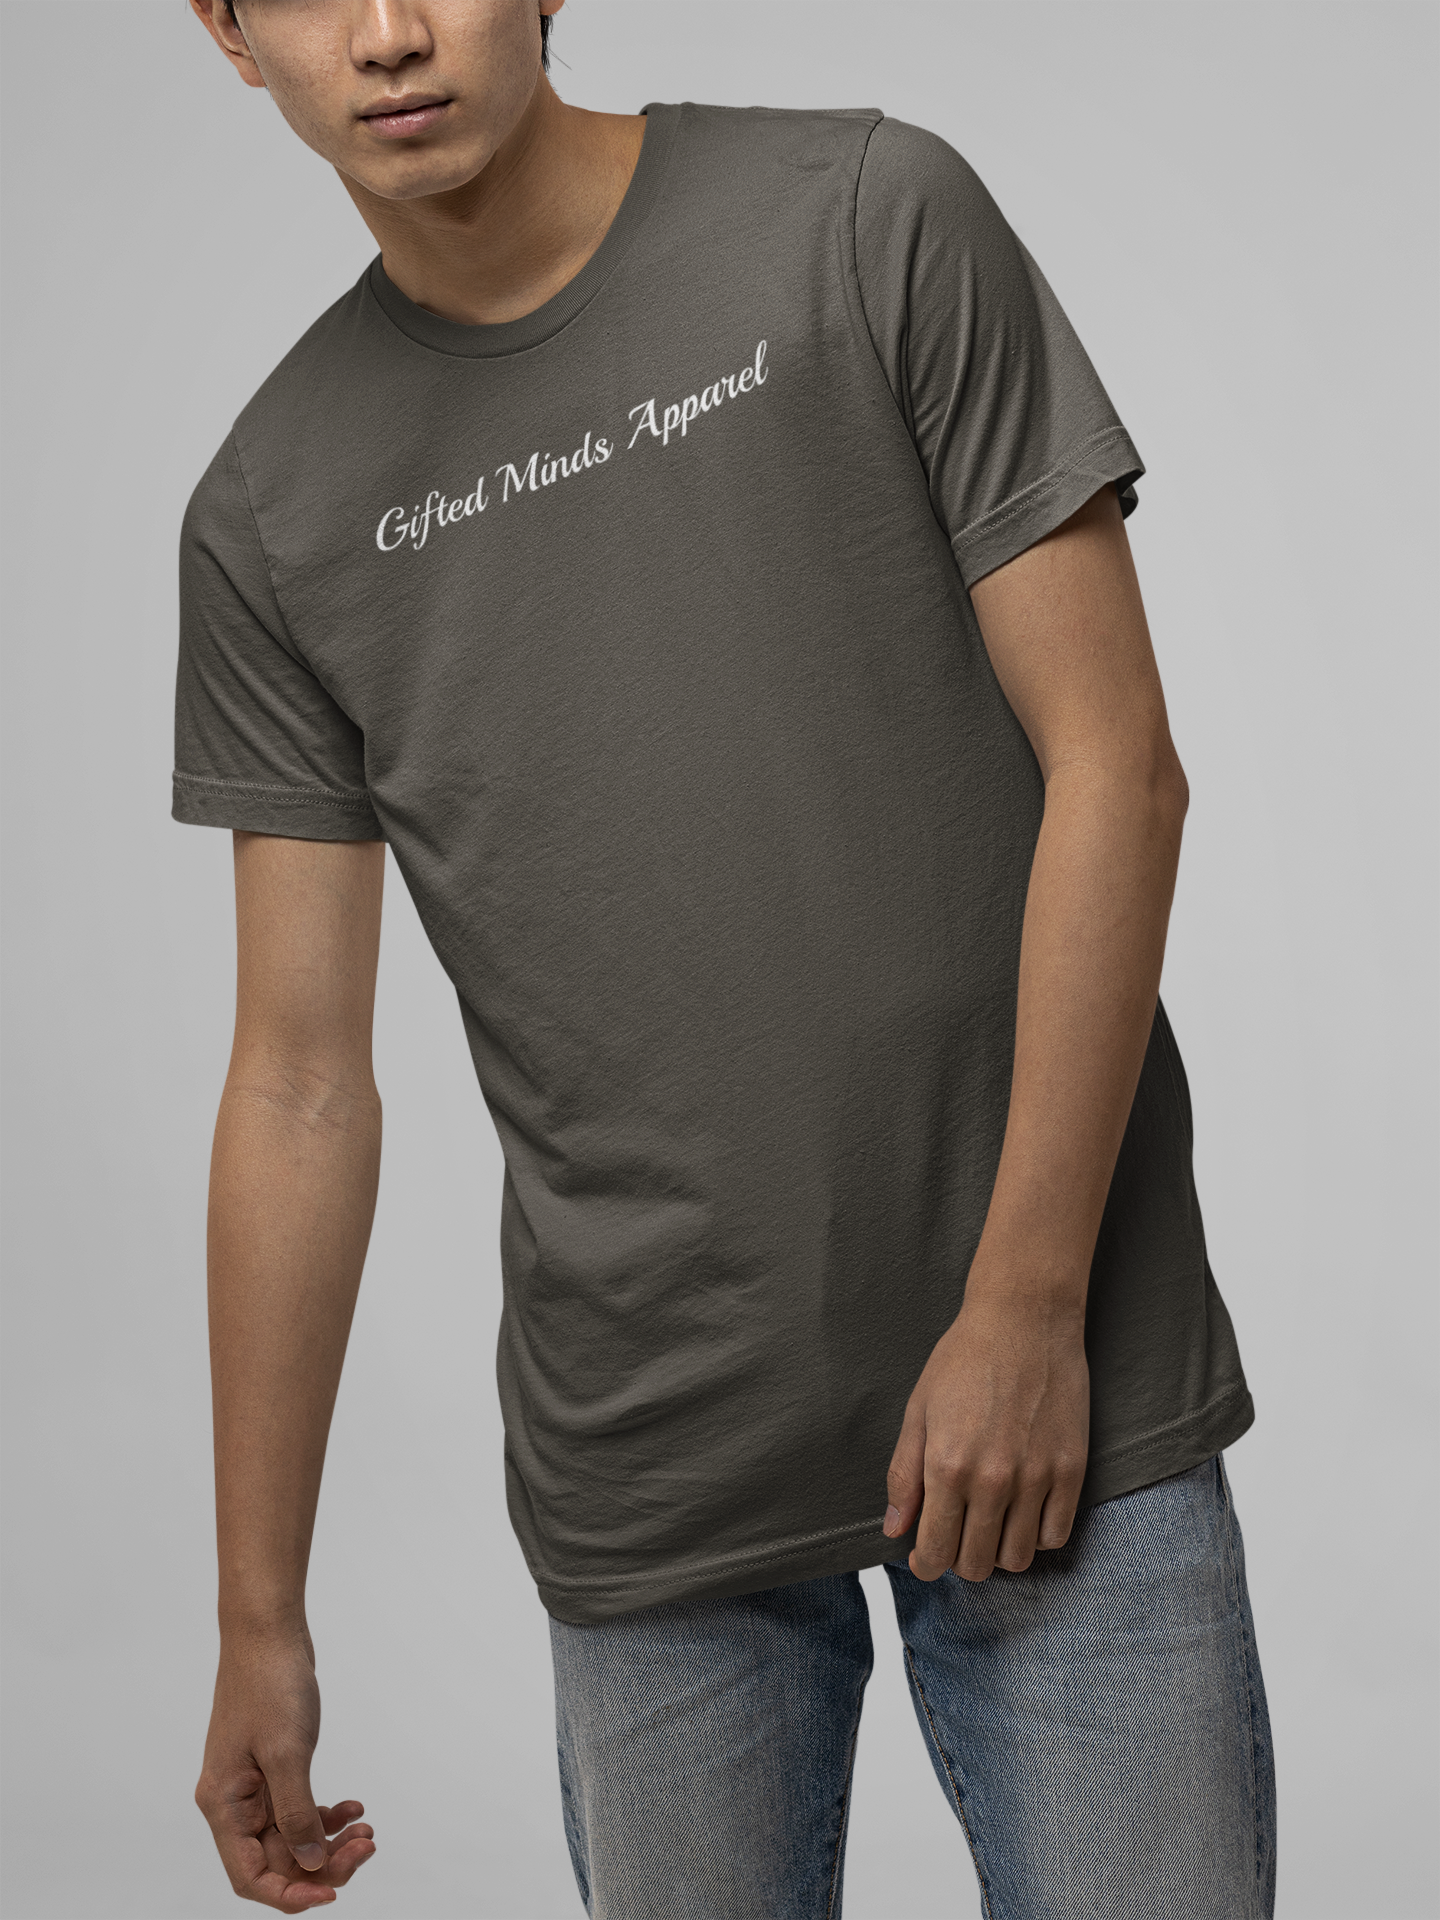 Gifted Minds Apparel Premium Triblend Tee - GFTD MNDS